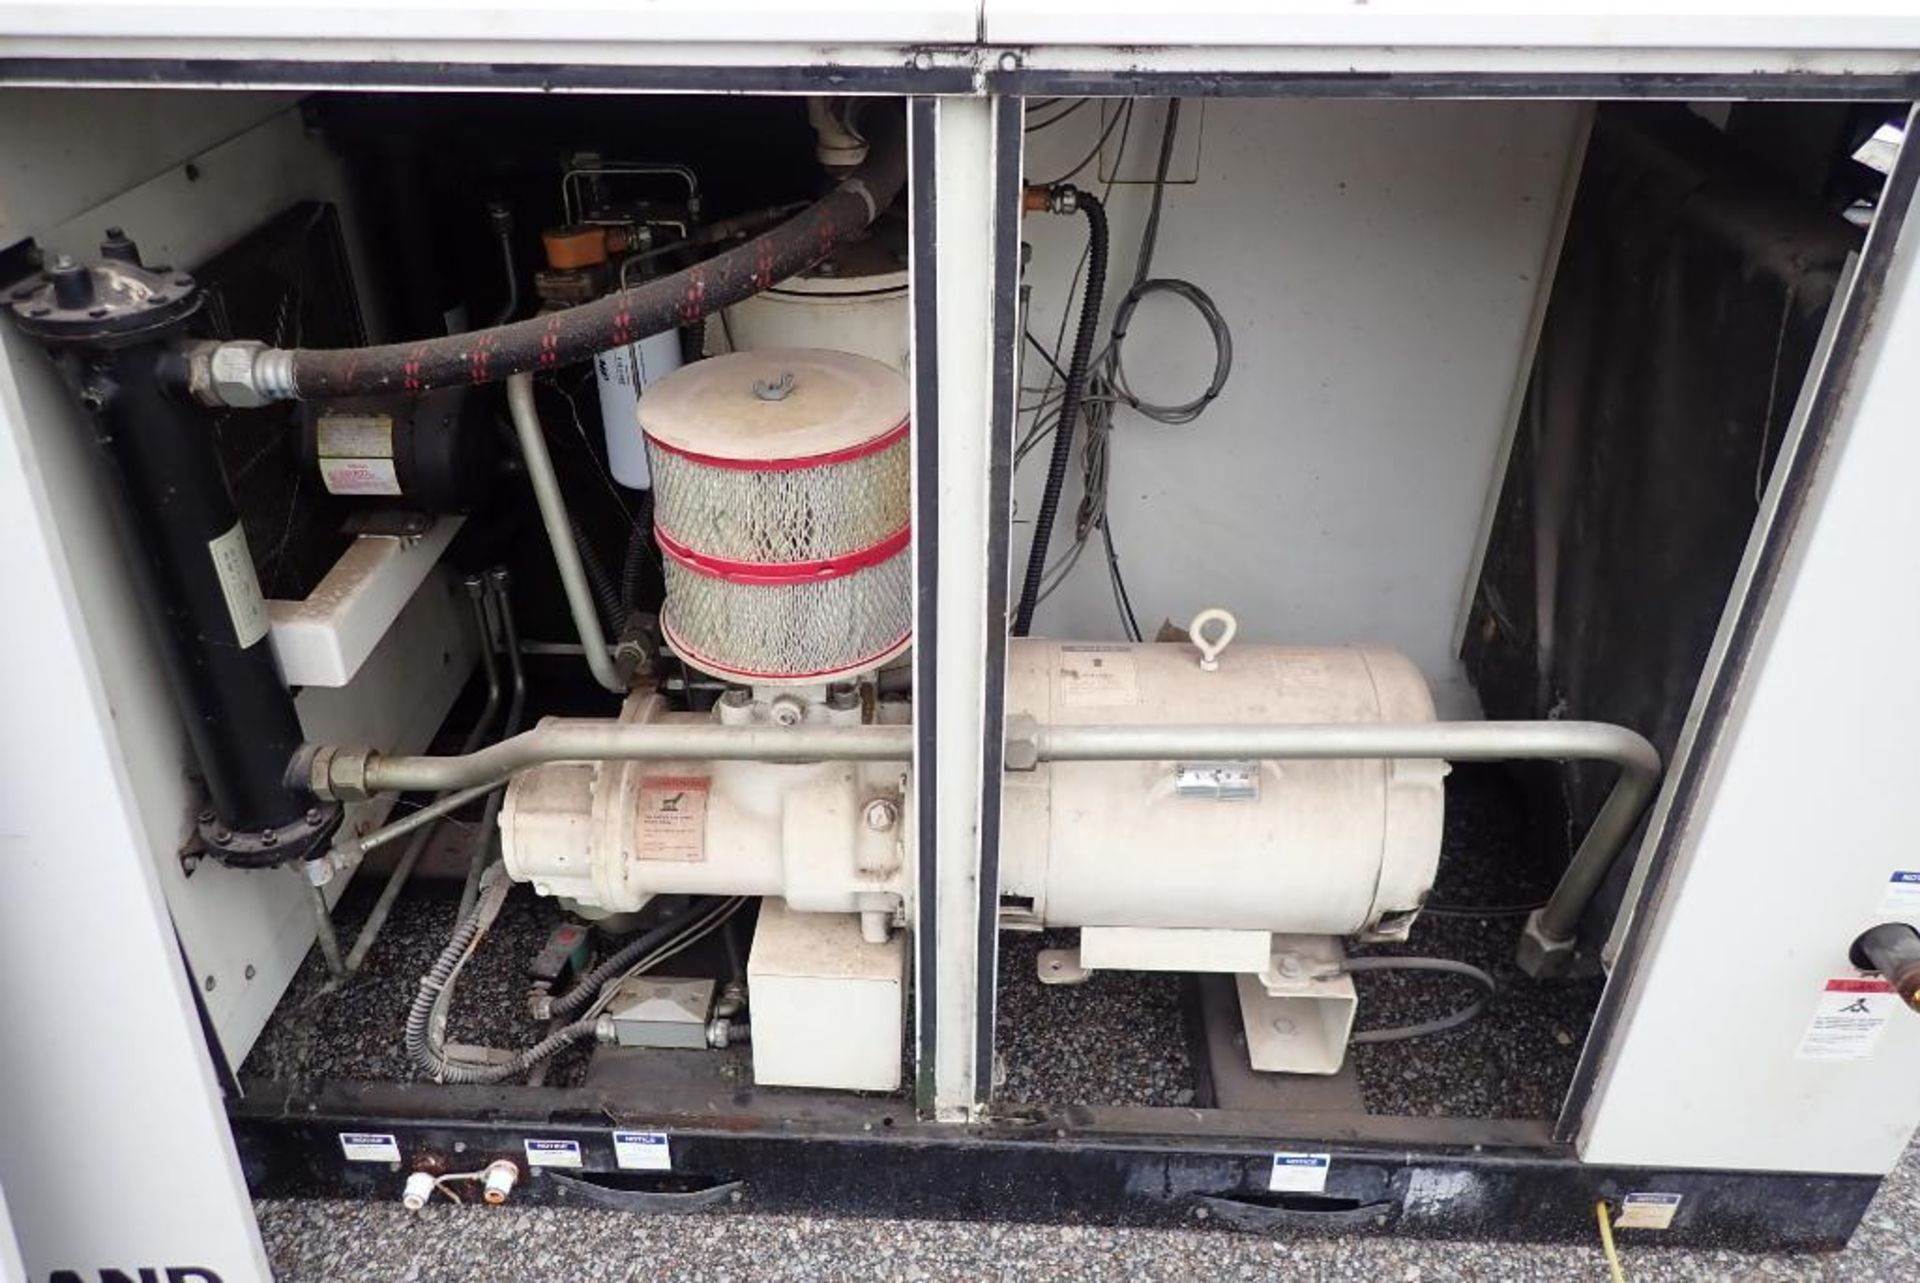 1991 Ingersoll Rand 60 hp air compressor - Image 6 of 25